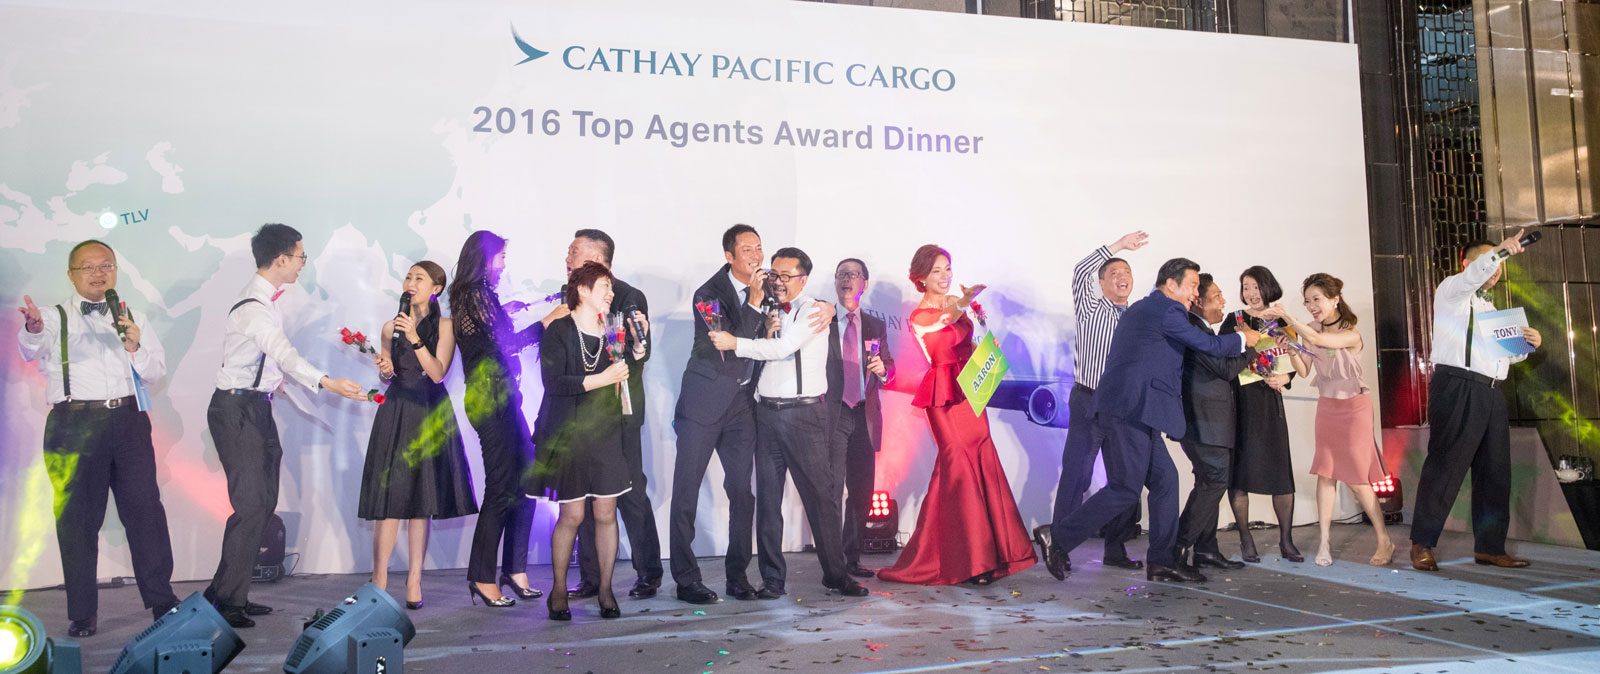 A chorus line: Cathay Pacific Cargo staff and cargo customers strut their stuff